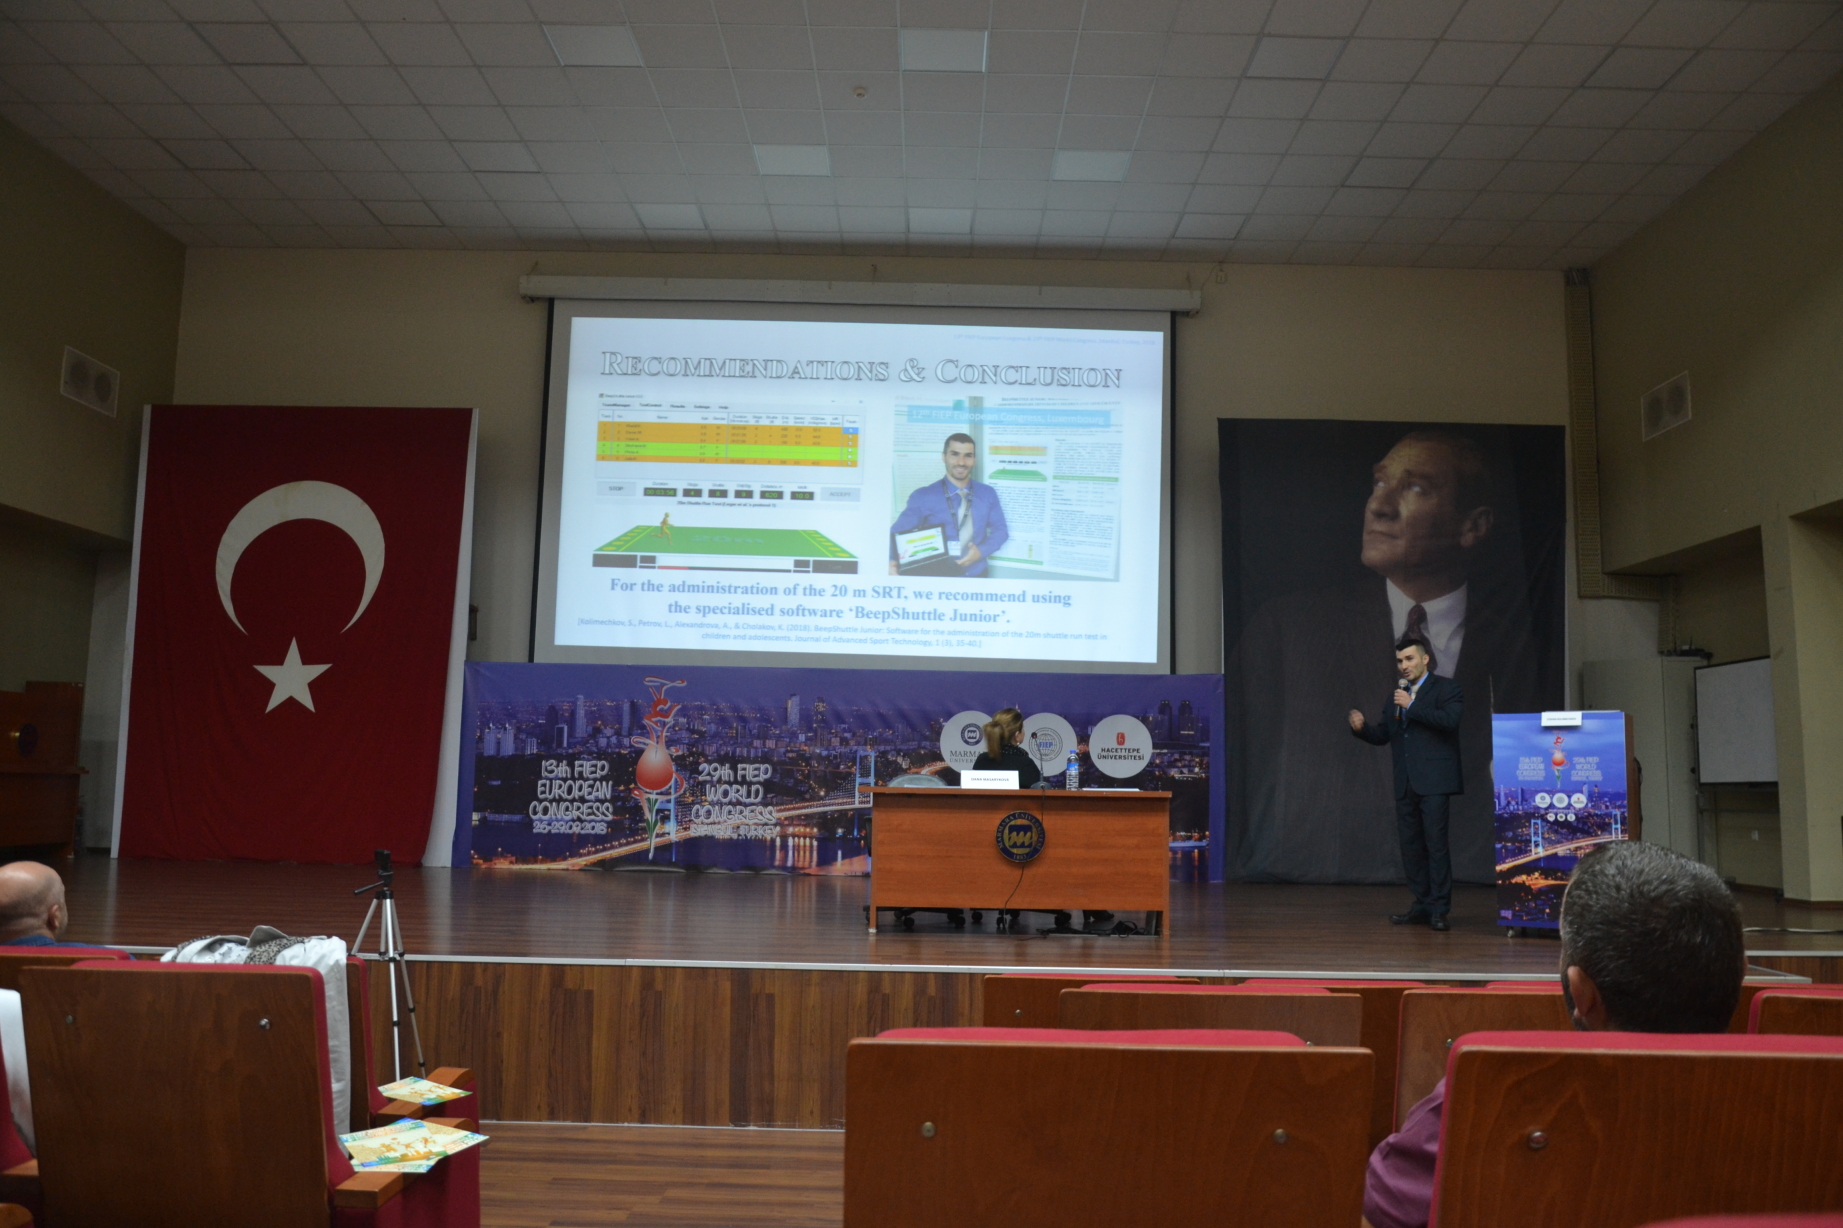 The beep test software BeepShuttle Junior was mentioned at the 13th European and 29th World FIEP Congress in Istanbul, 2018